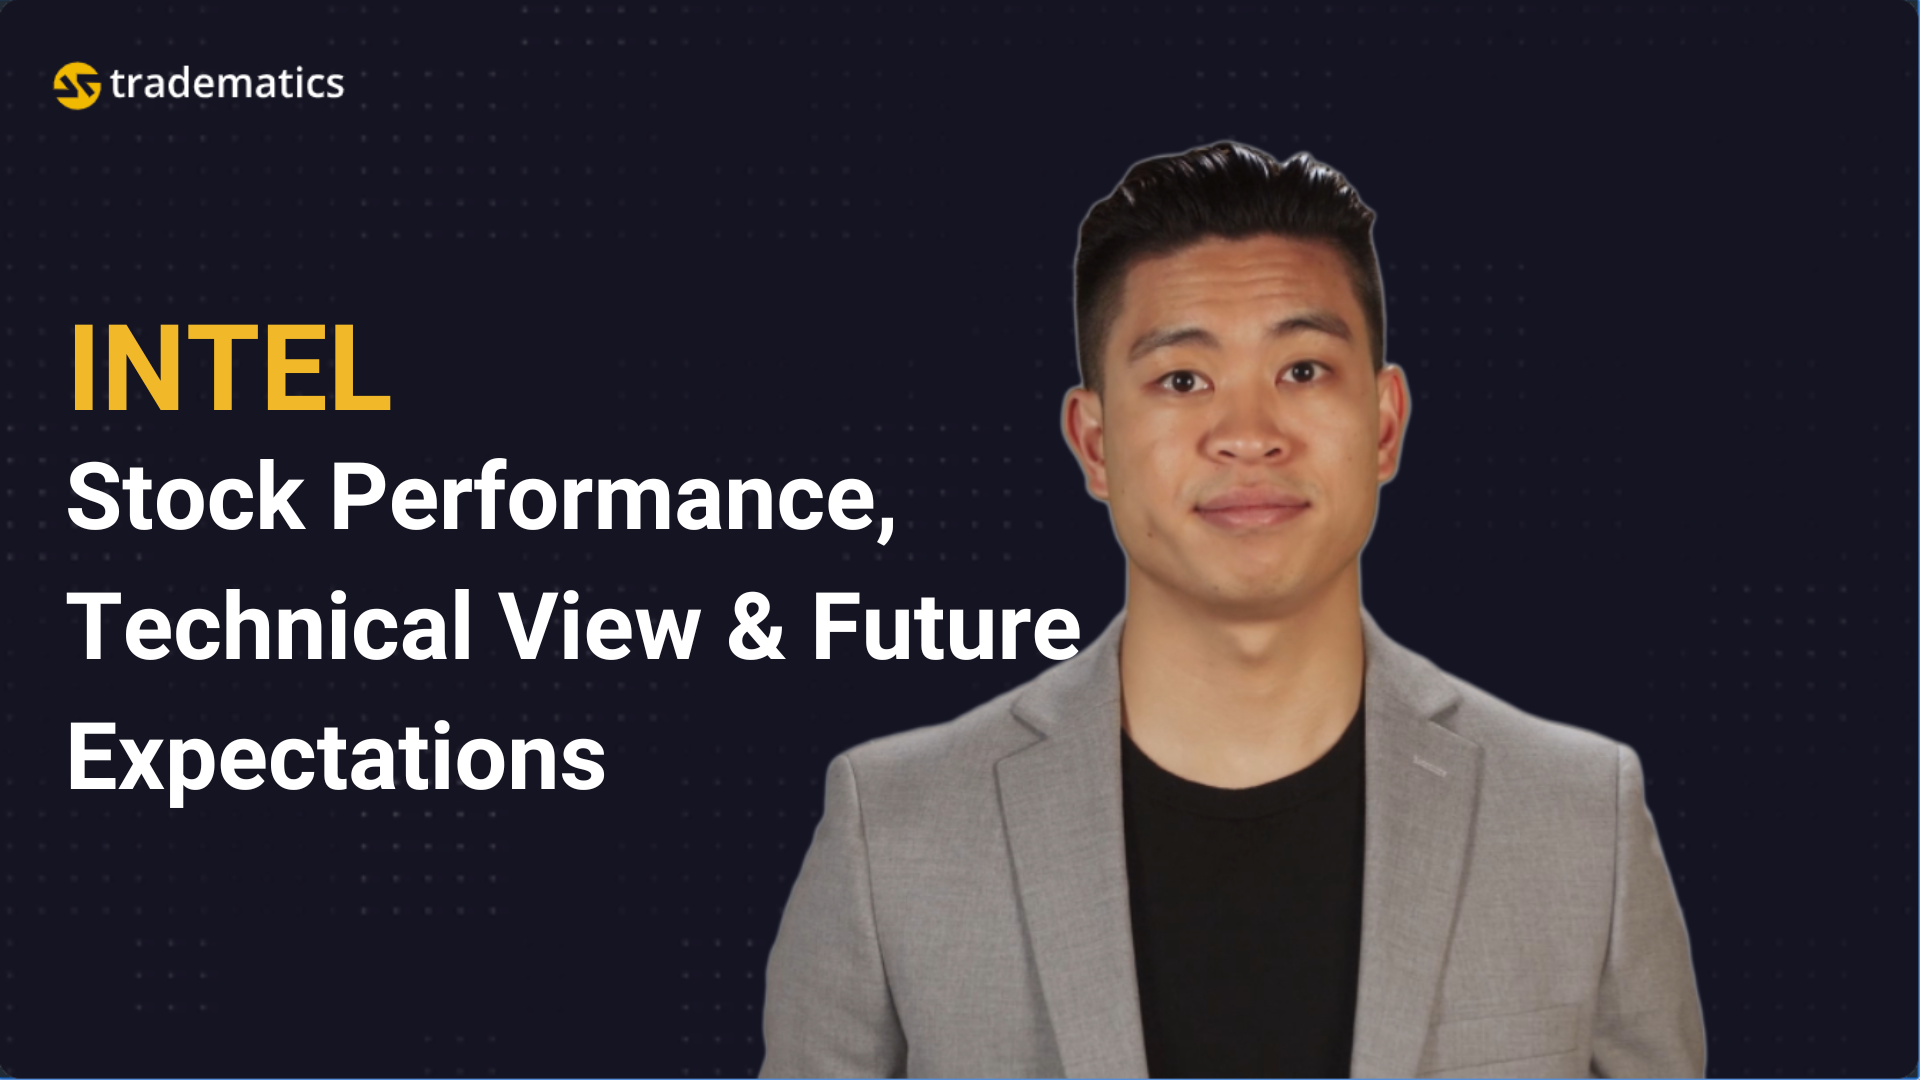 Tradematics | #10 INTEL | Stock Performance, Technical View & Future Expectations